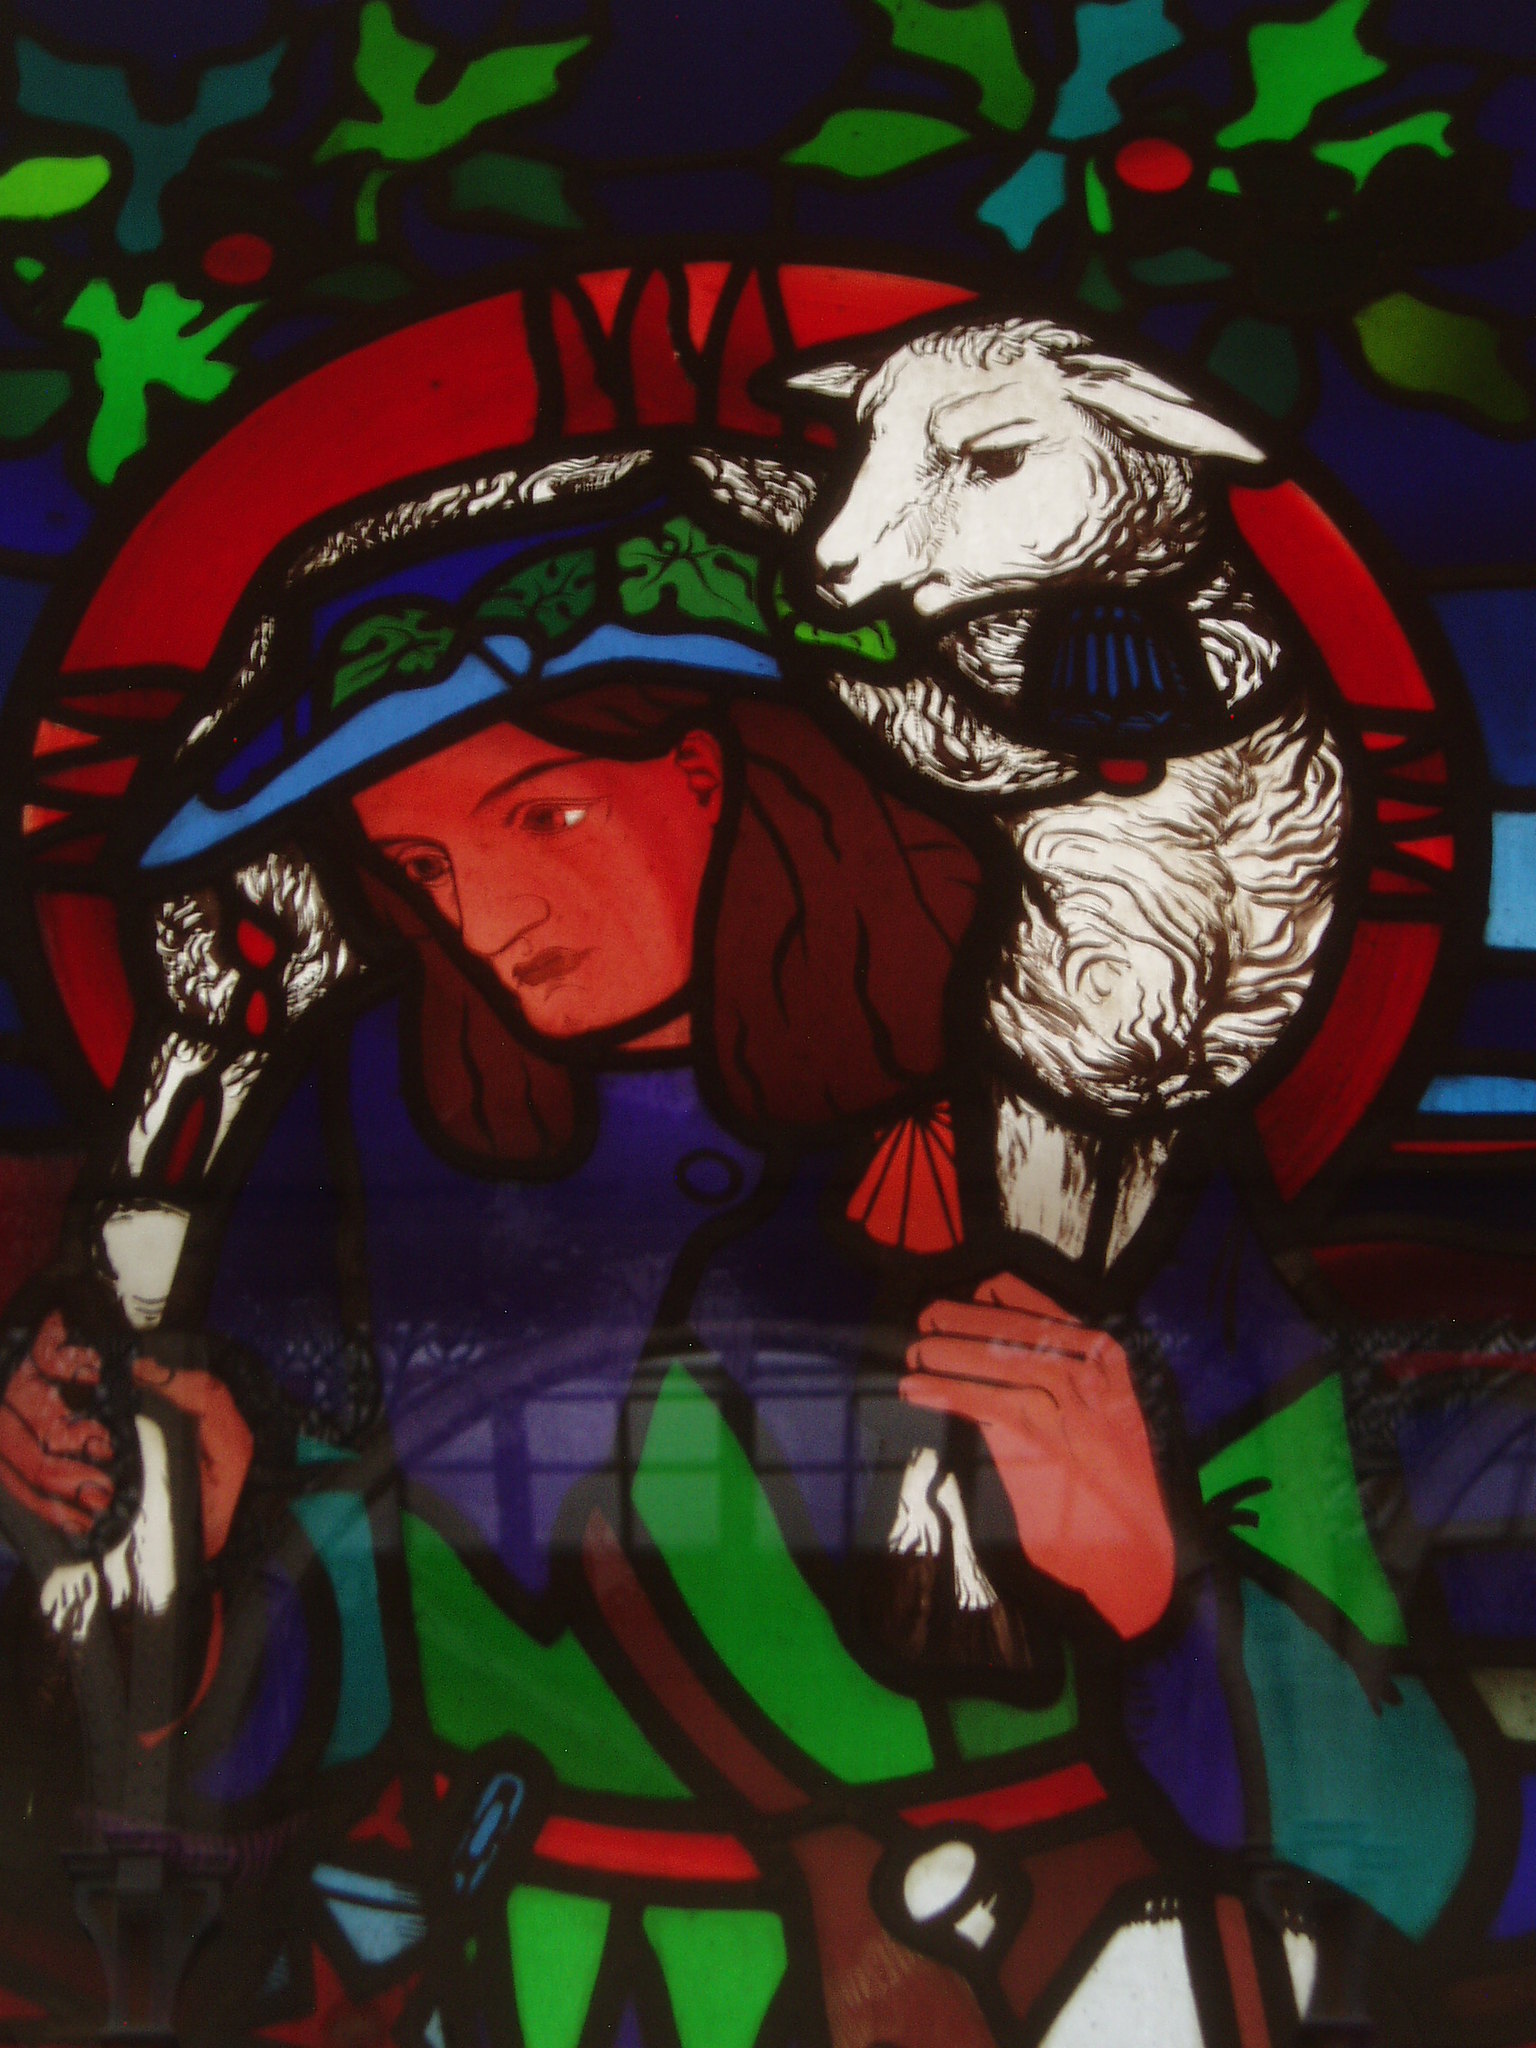 Good Shepherd The first ever piece of stained glass designed by Edward Burne Jones (his earliest work strongly influenced by Rossetti) and made by Powell's. It was formerly in a Methodist chapel in Maidstone. Birmingham Museum & Art Gallery is one of the most important regional museums in the country, with collections ranging from archaeology to an extensive collection of fine art, including a superb sequence of Pre-Raphaelite paintings. There is also an impressive industrial gallery, which exhibits some of the highest quality crafts made in the city during the 19th century, most notably ceramics and stained glass. www.birminghammuseums.org.uk/bmag/about